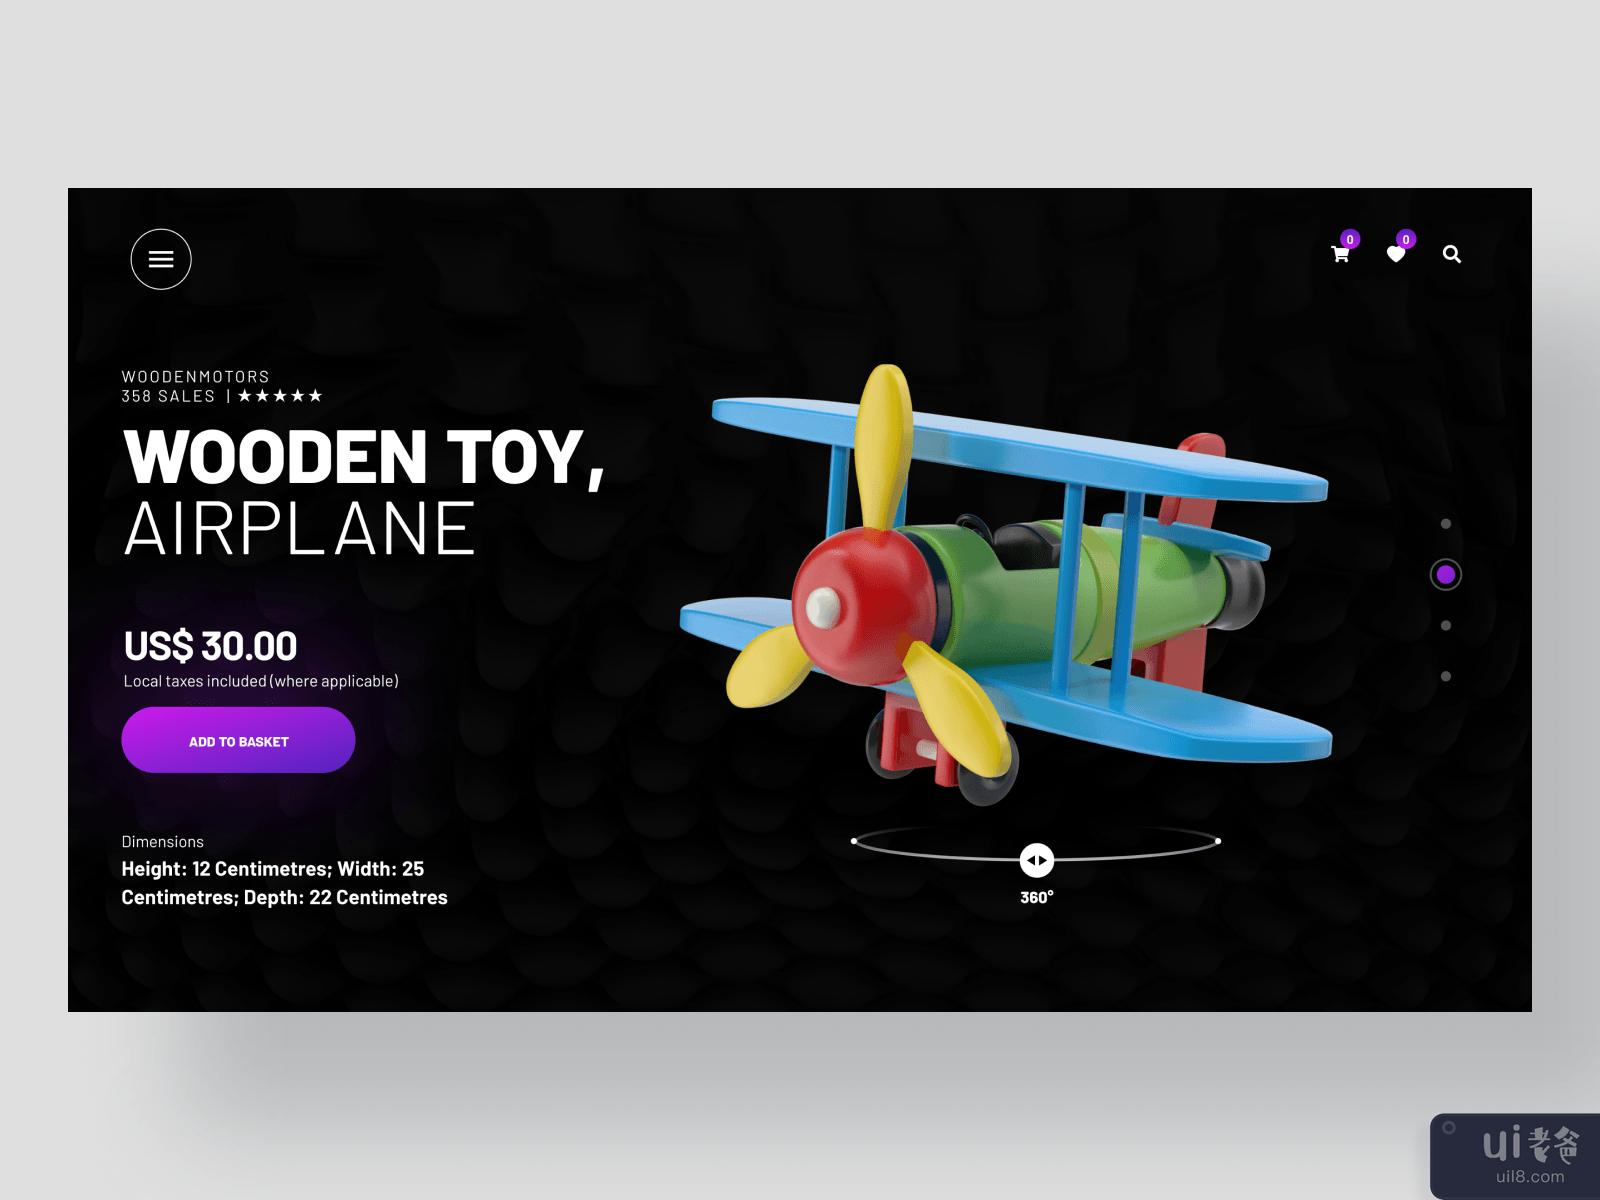 Web Design UI Kit Product Page  - Wooden Toy, Airplane